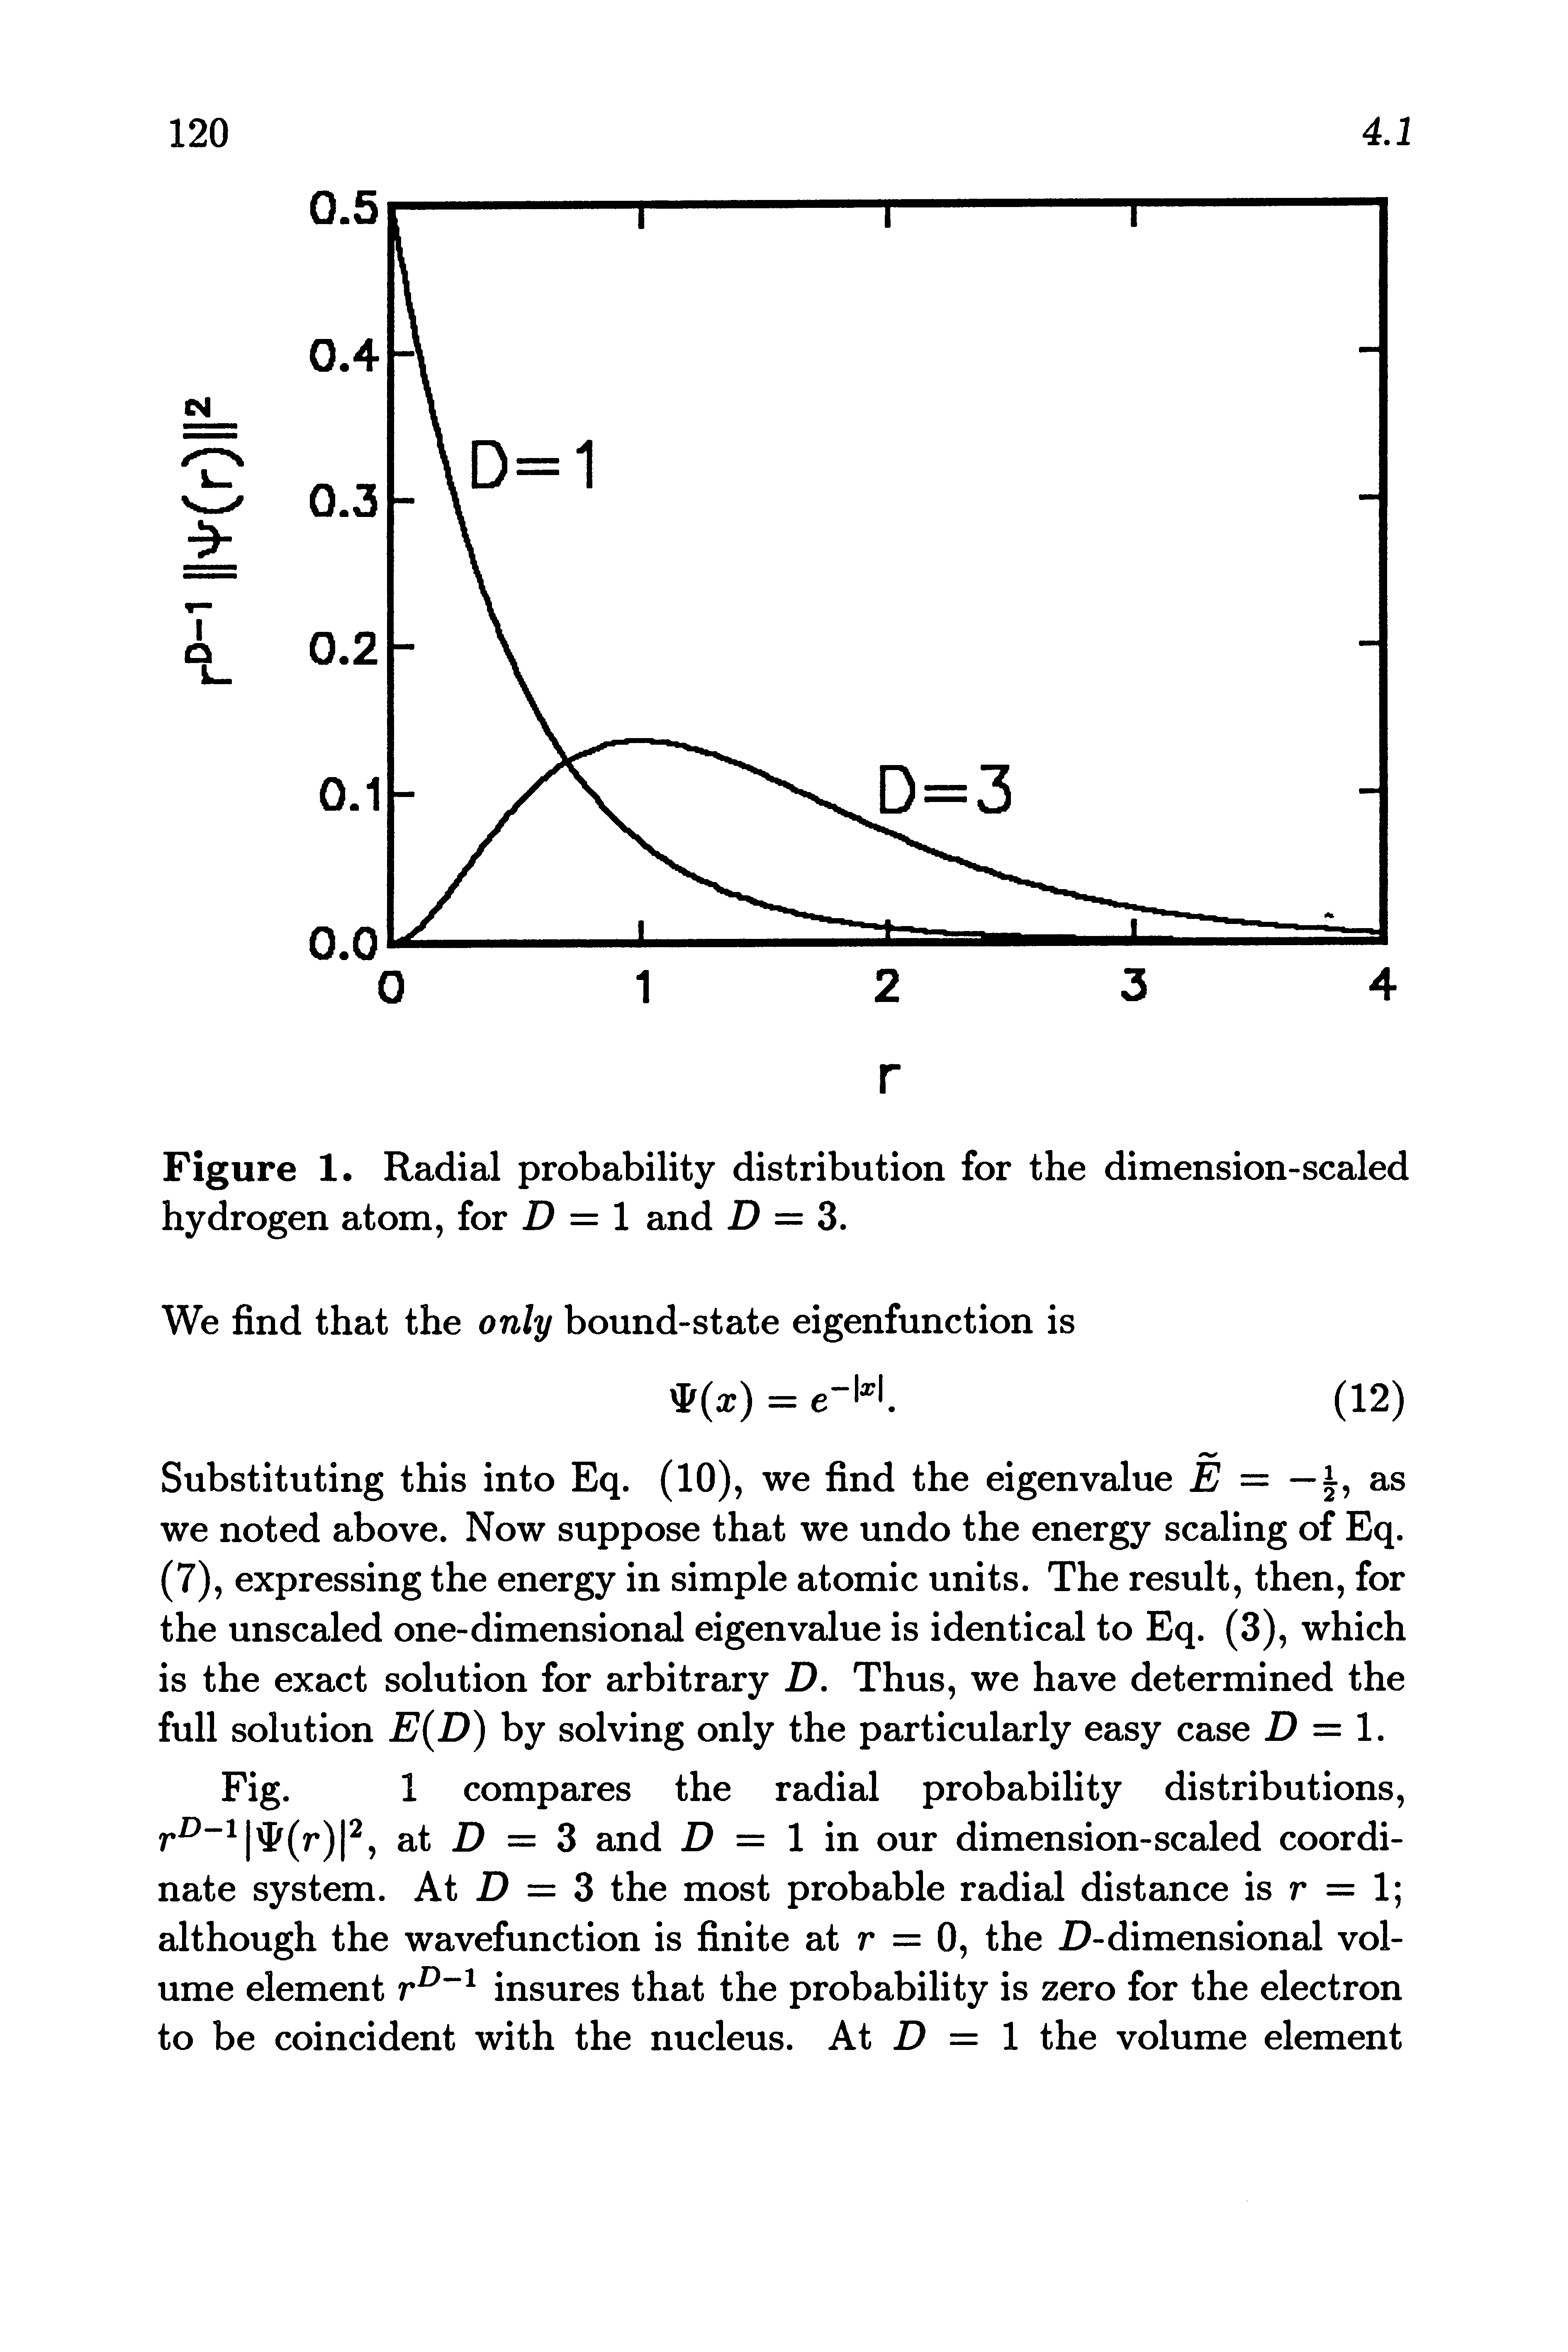 Figure 1. Radial probability distribution for the dimension-scaled hydrogen atom, for D = 1 and D = 3.